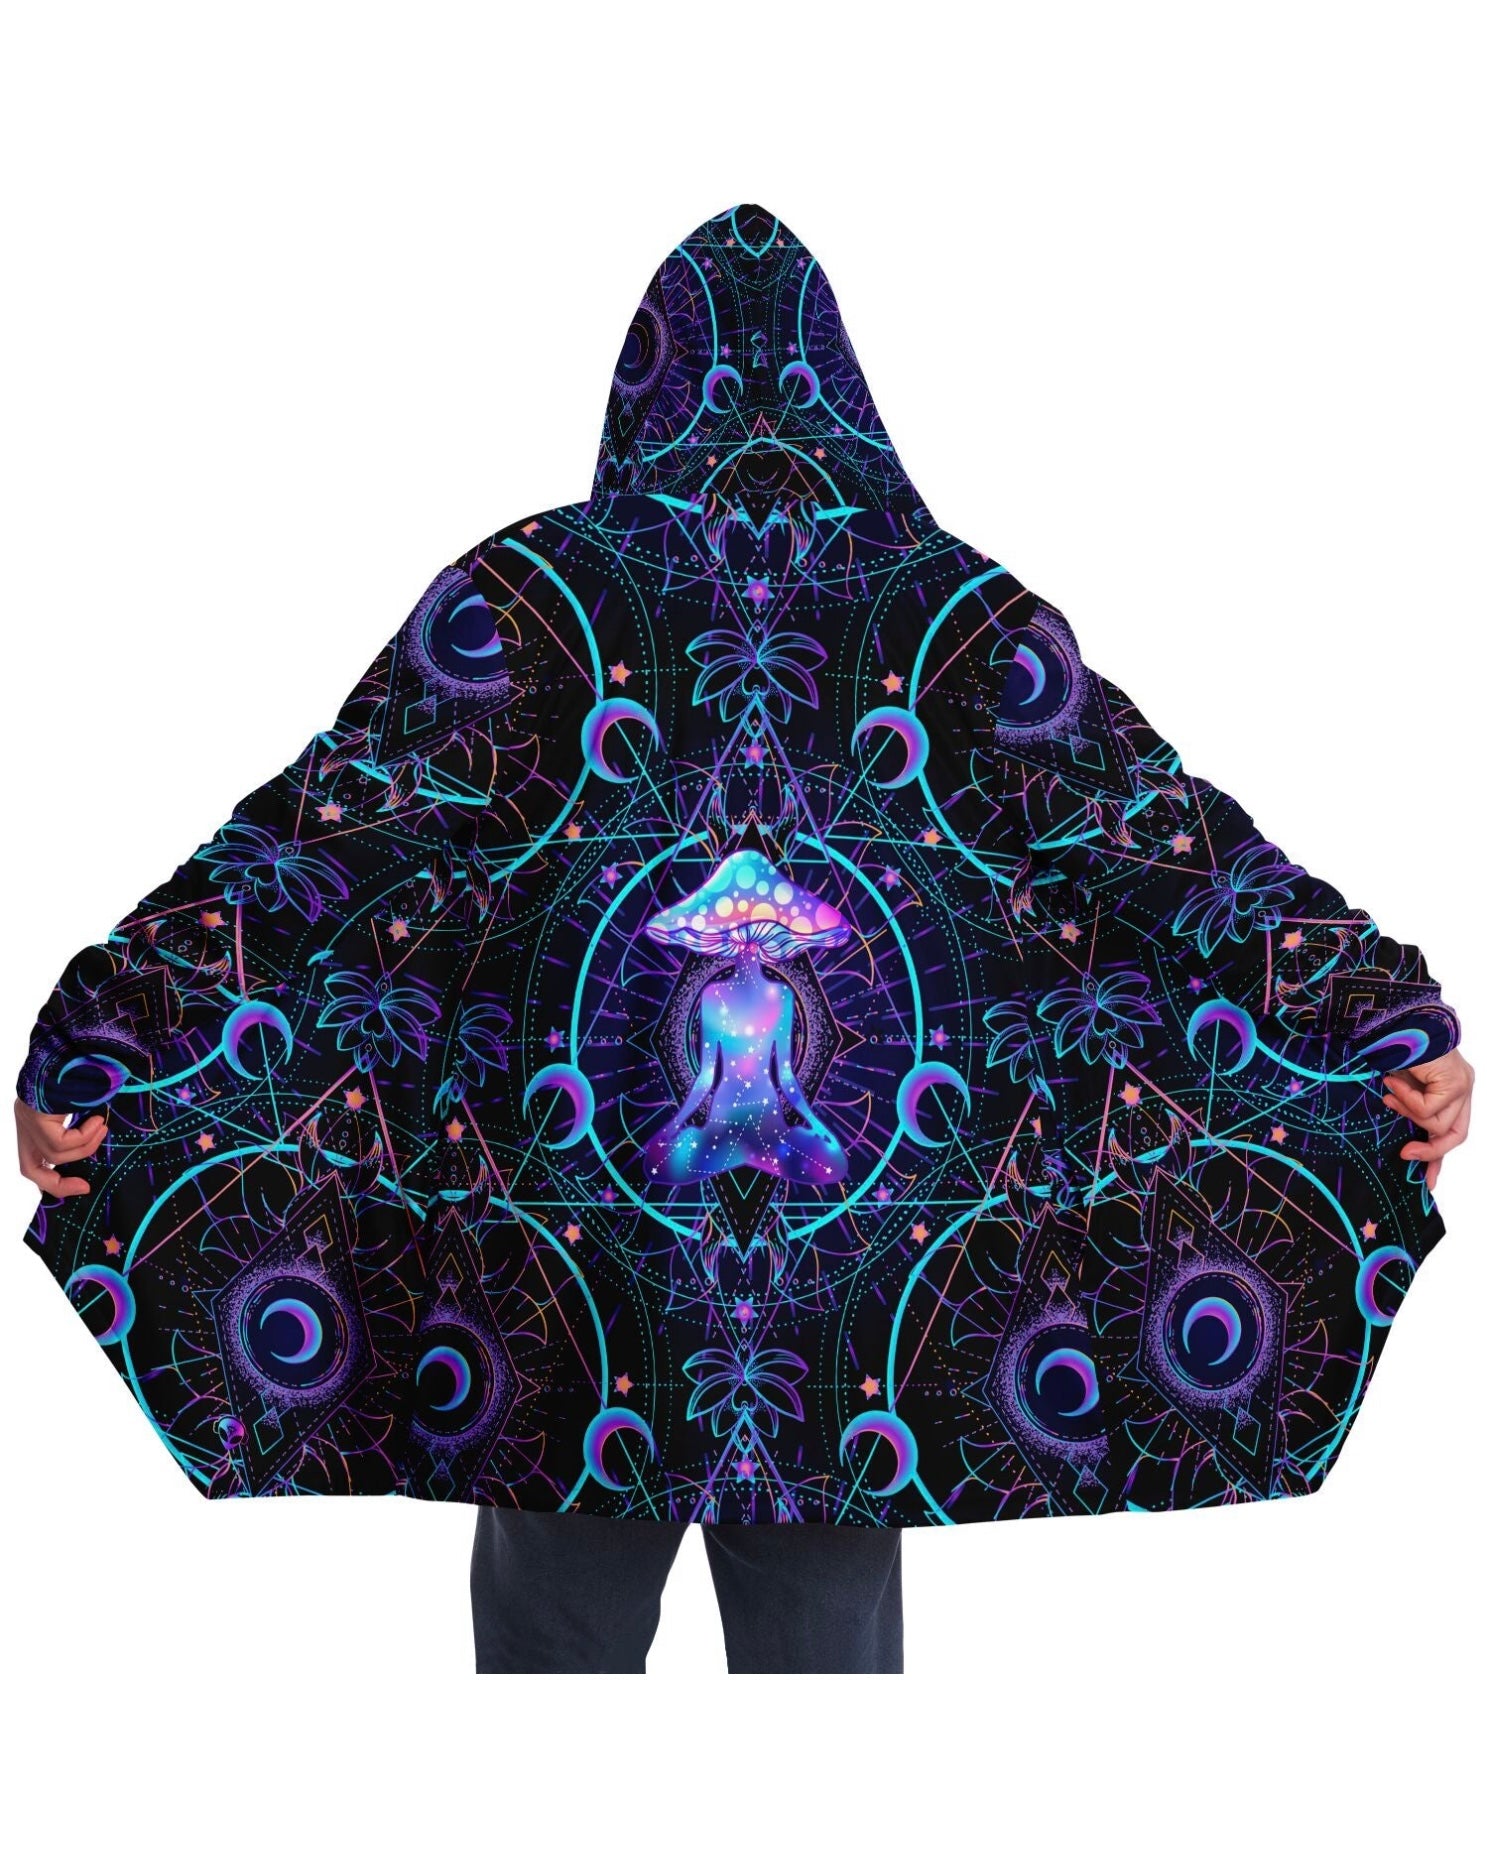 Holographic Reflective Rave Jacket, Iridescent Festival Wear Coat Clothing,  Reflective Rainbow Long Outerwear Track Cloak Rave Outfit -  Hong Kong